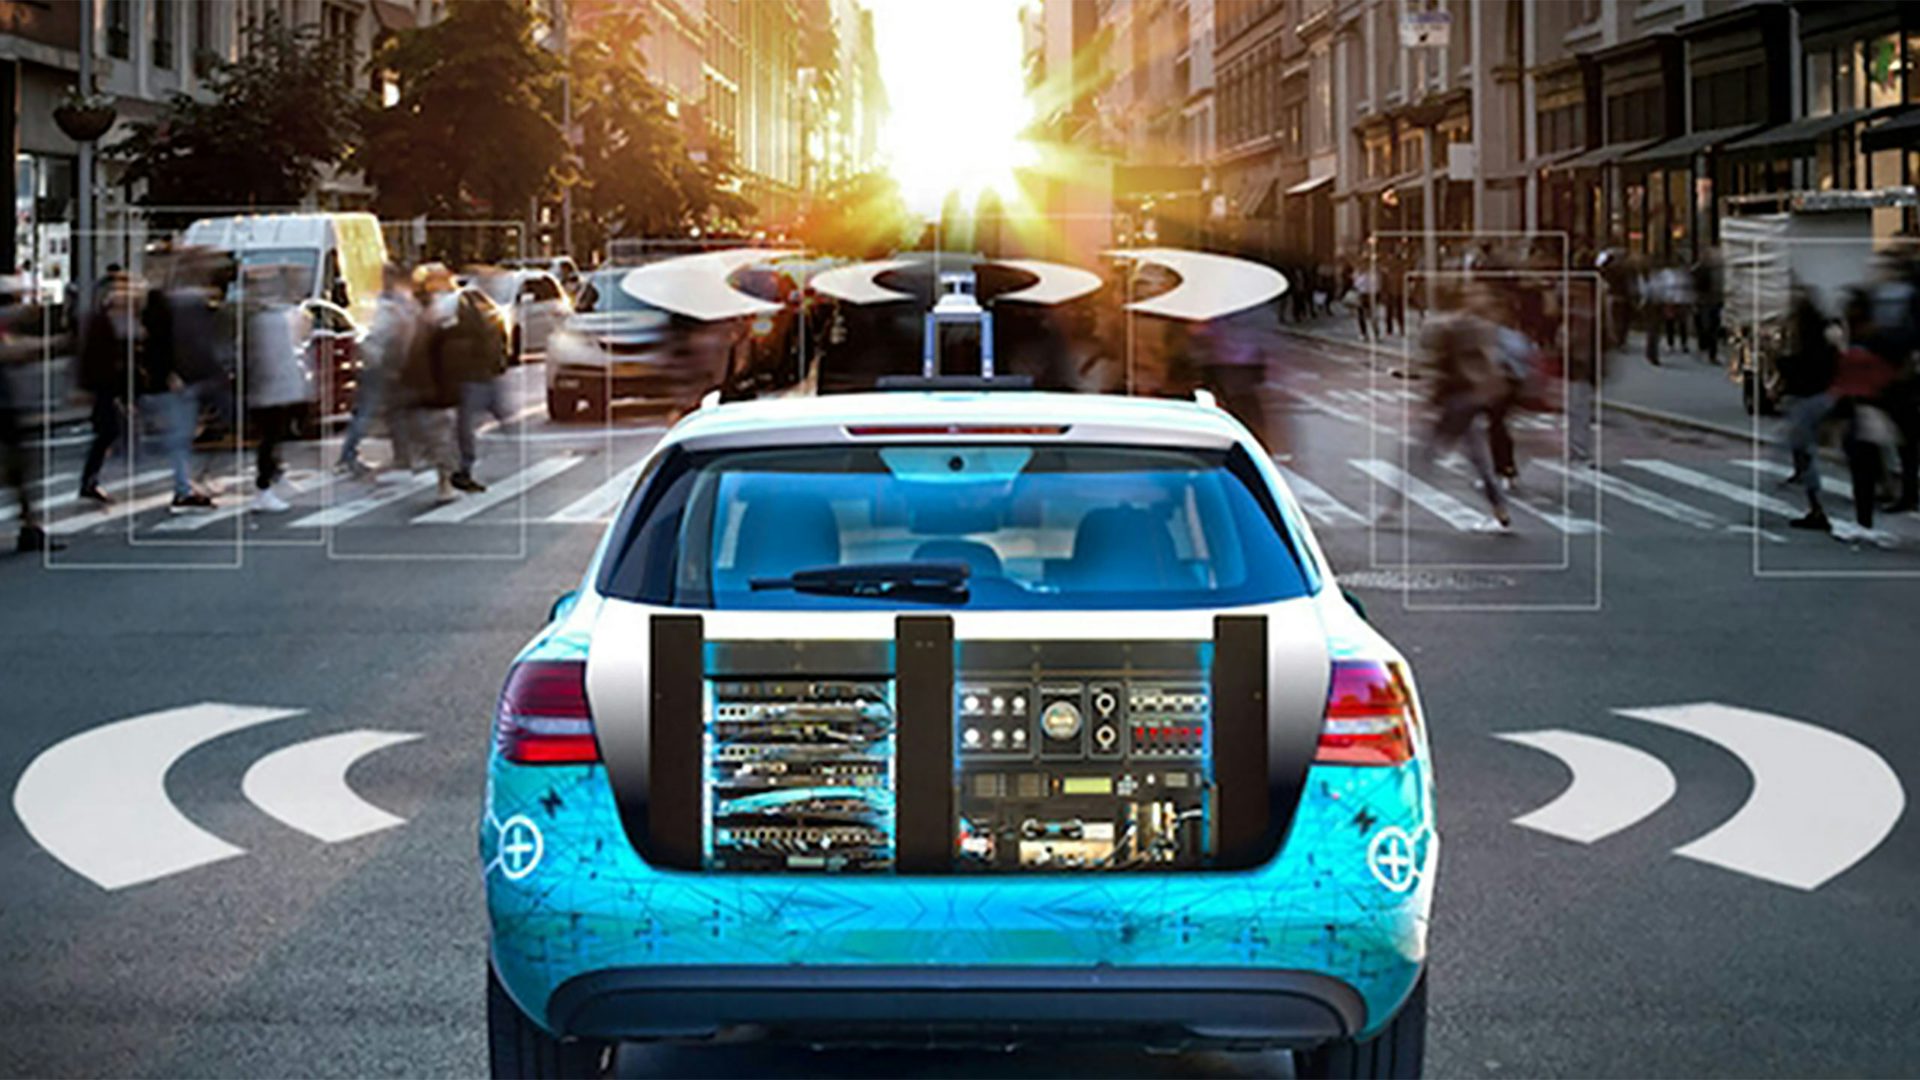 Rear view of a car on the street, with an image of electronic components grafted onto the car's rear trunk, and lines suggesting sound emanating from the car